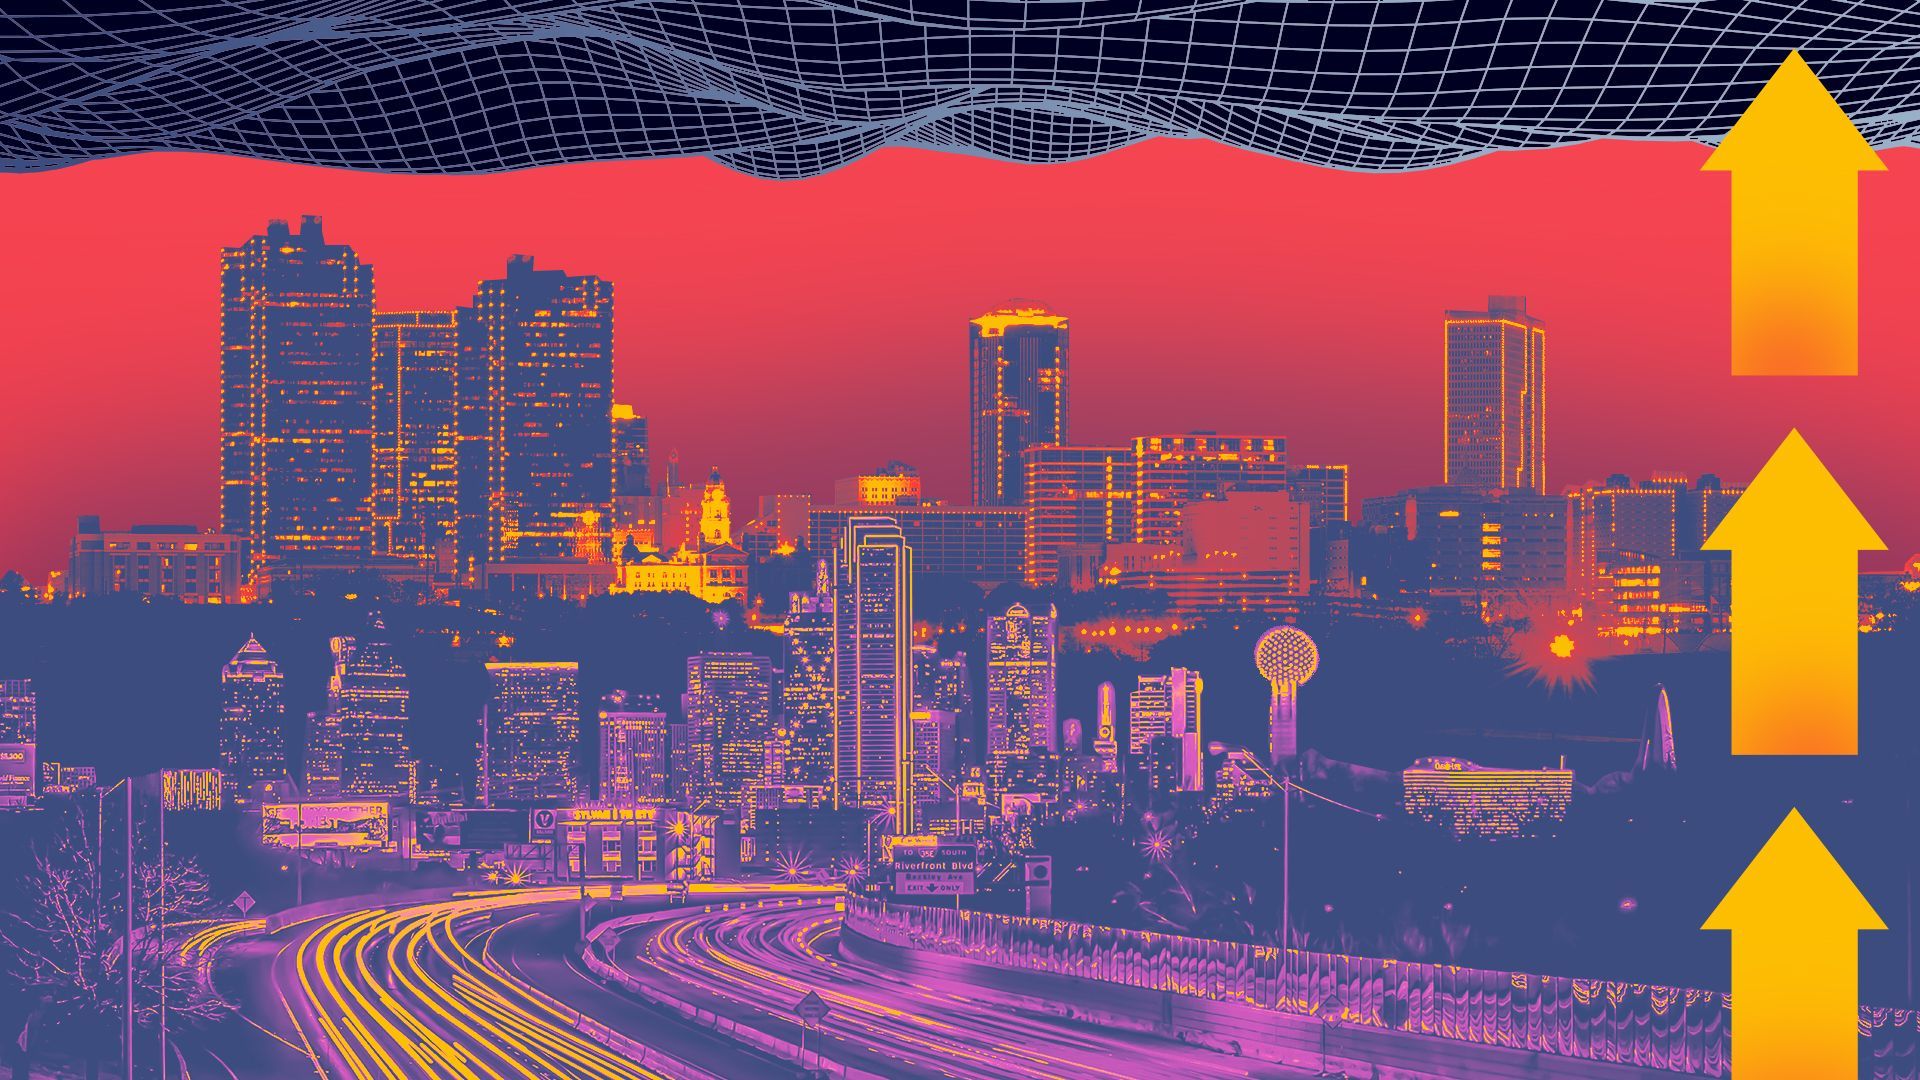 Illustration of the skylines of Dallas and Fort Worth with abstract wire frame shapes and upward arrows.